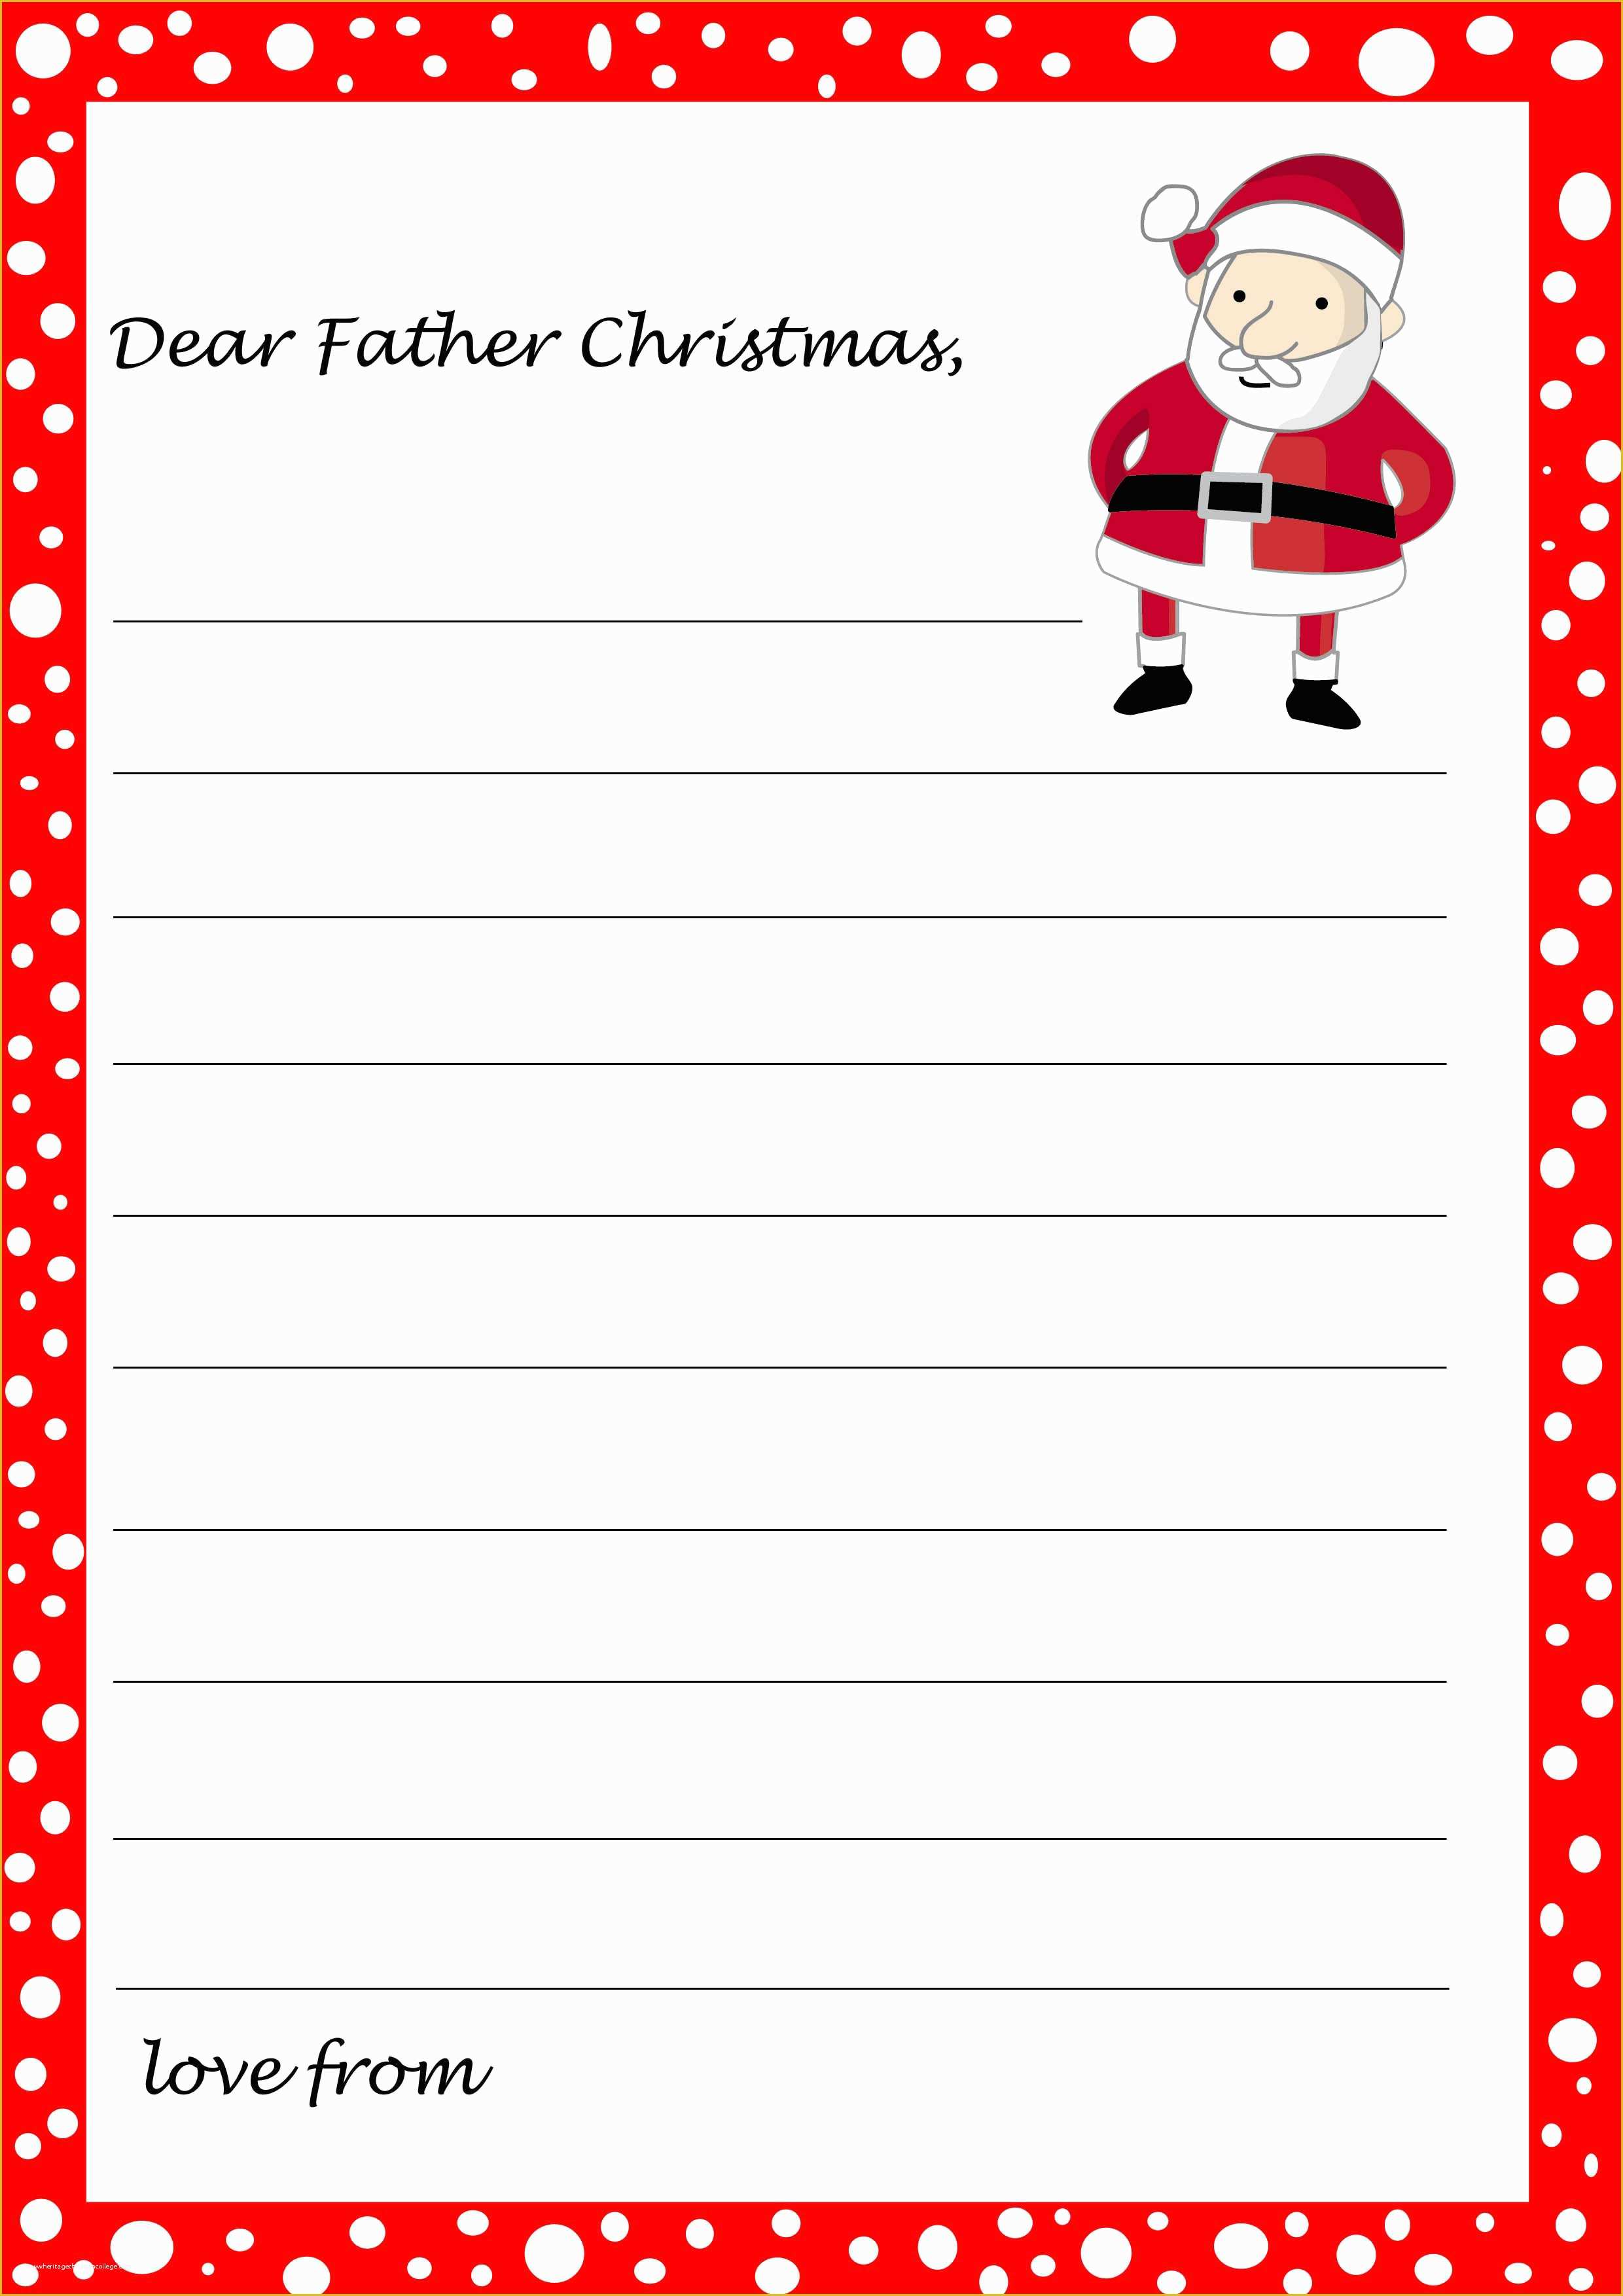 Free Christmas Letter Templates Microsoft Word Of Template Letter to Santa